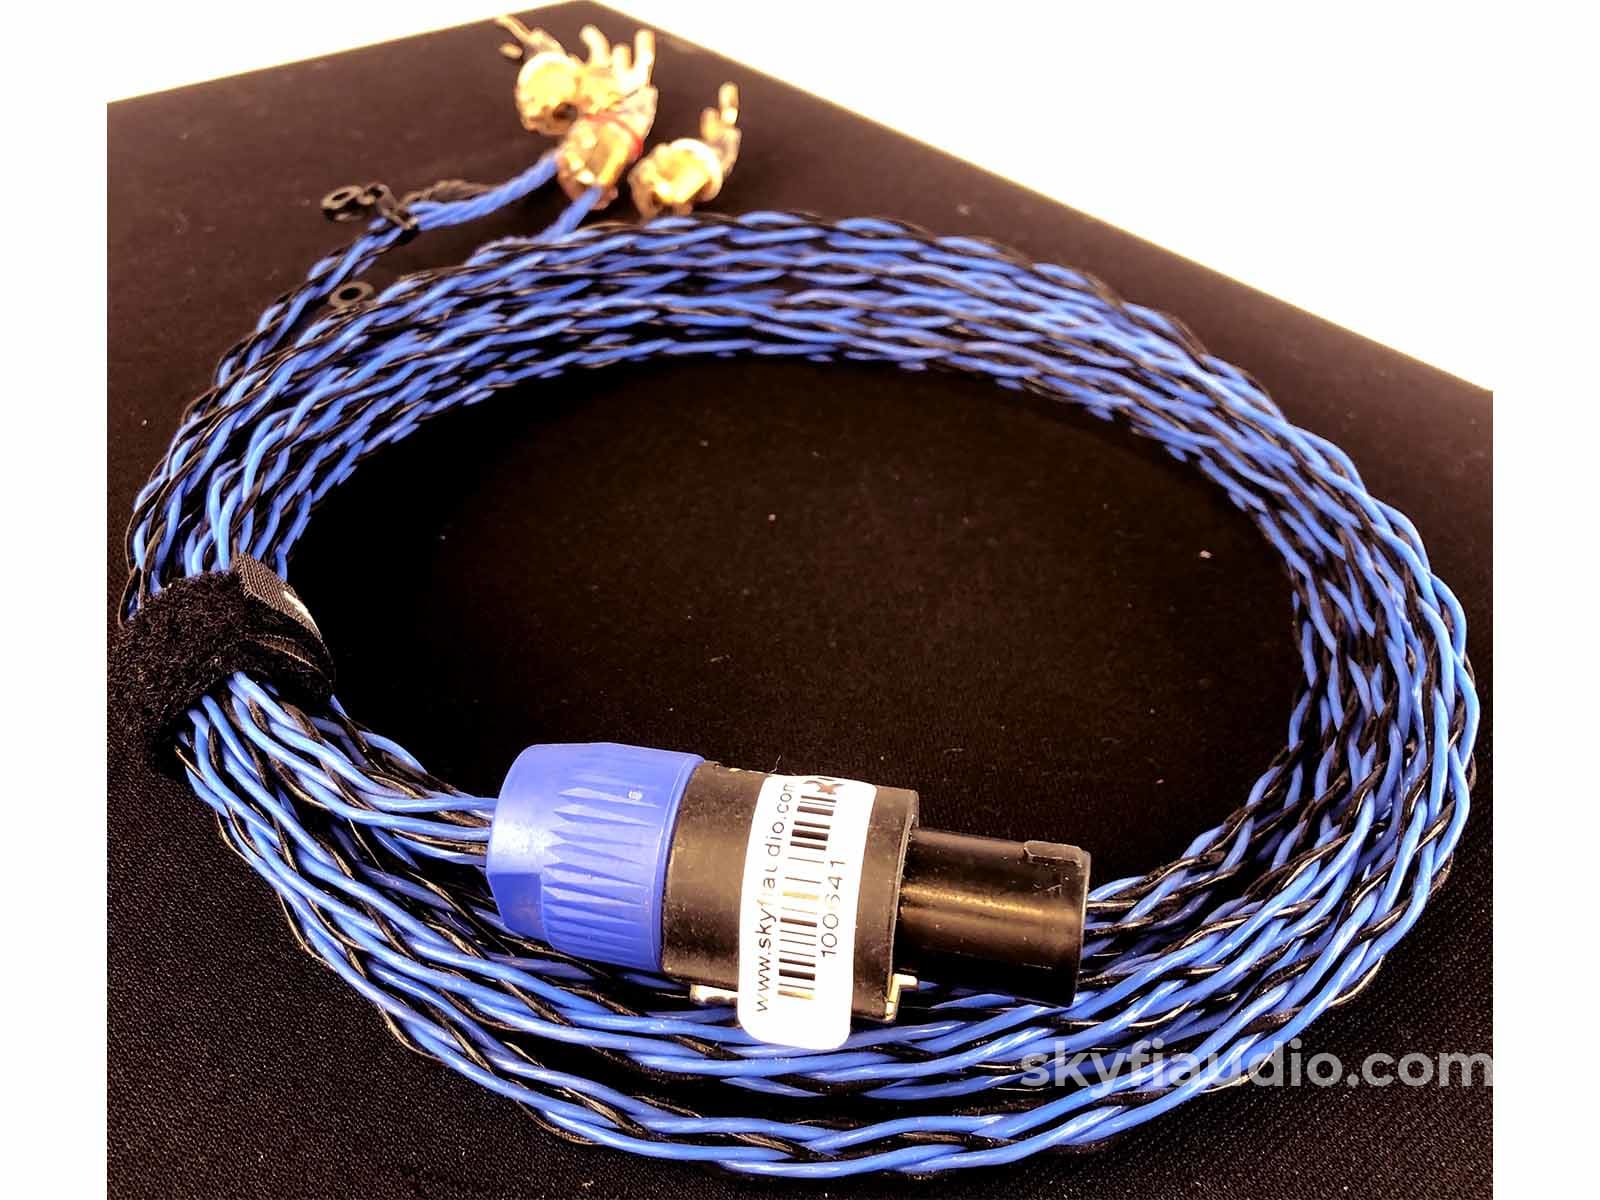 Kimber Kable Ascent Series - 4Tc Subwoofer Cable With Speakon Connector 7 Cables